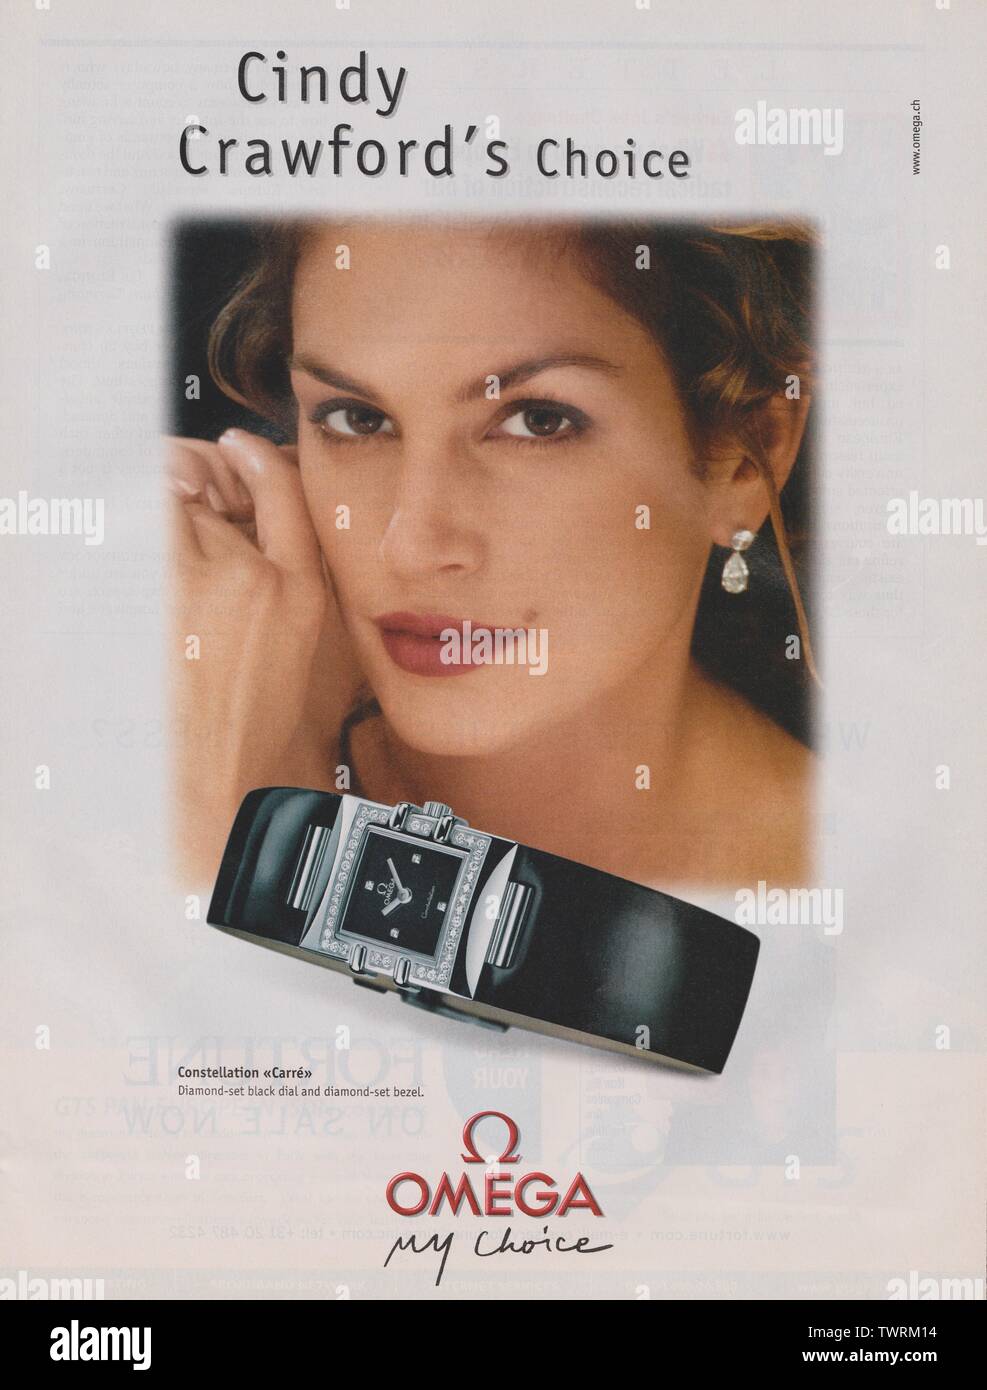 poster advertising OMEGA watch, in paper magazine from 2000, Cindy Crawford's Choice slogan, advertisement, creative OMEGA 2000s advert Stock Photo